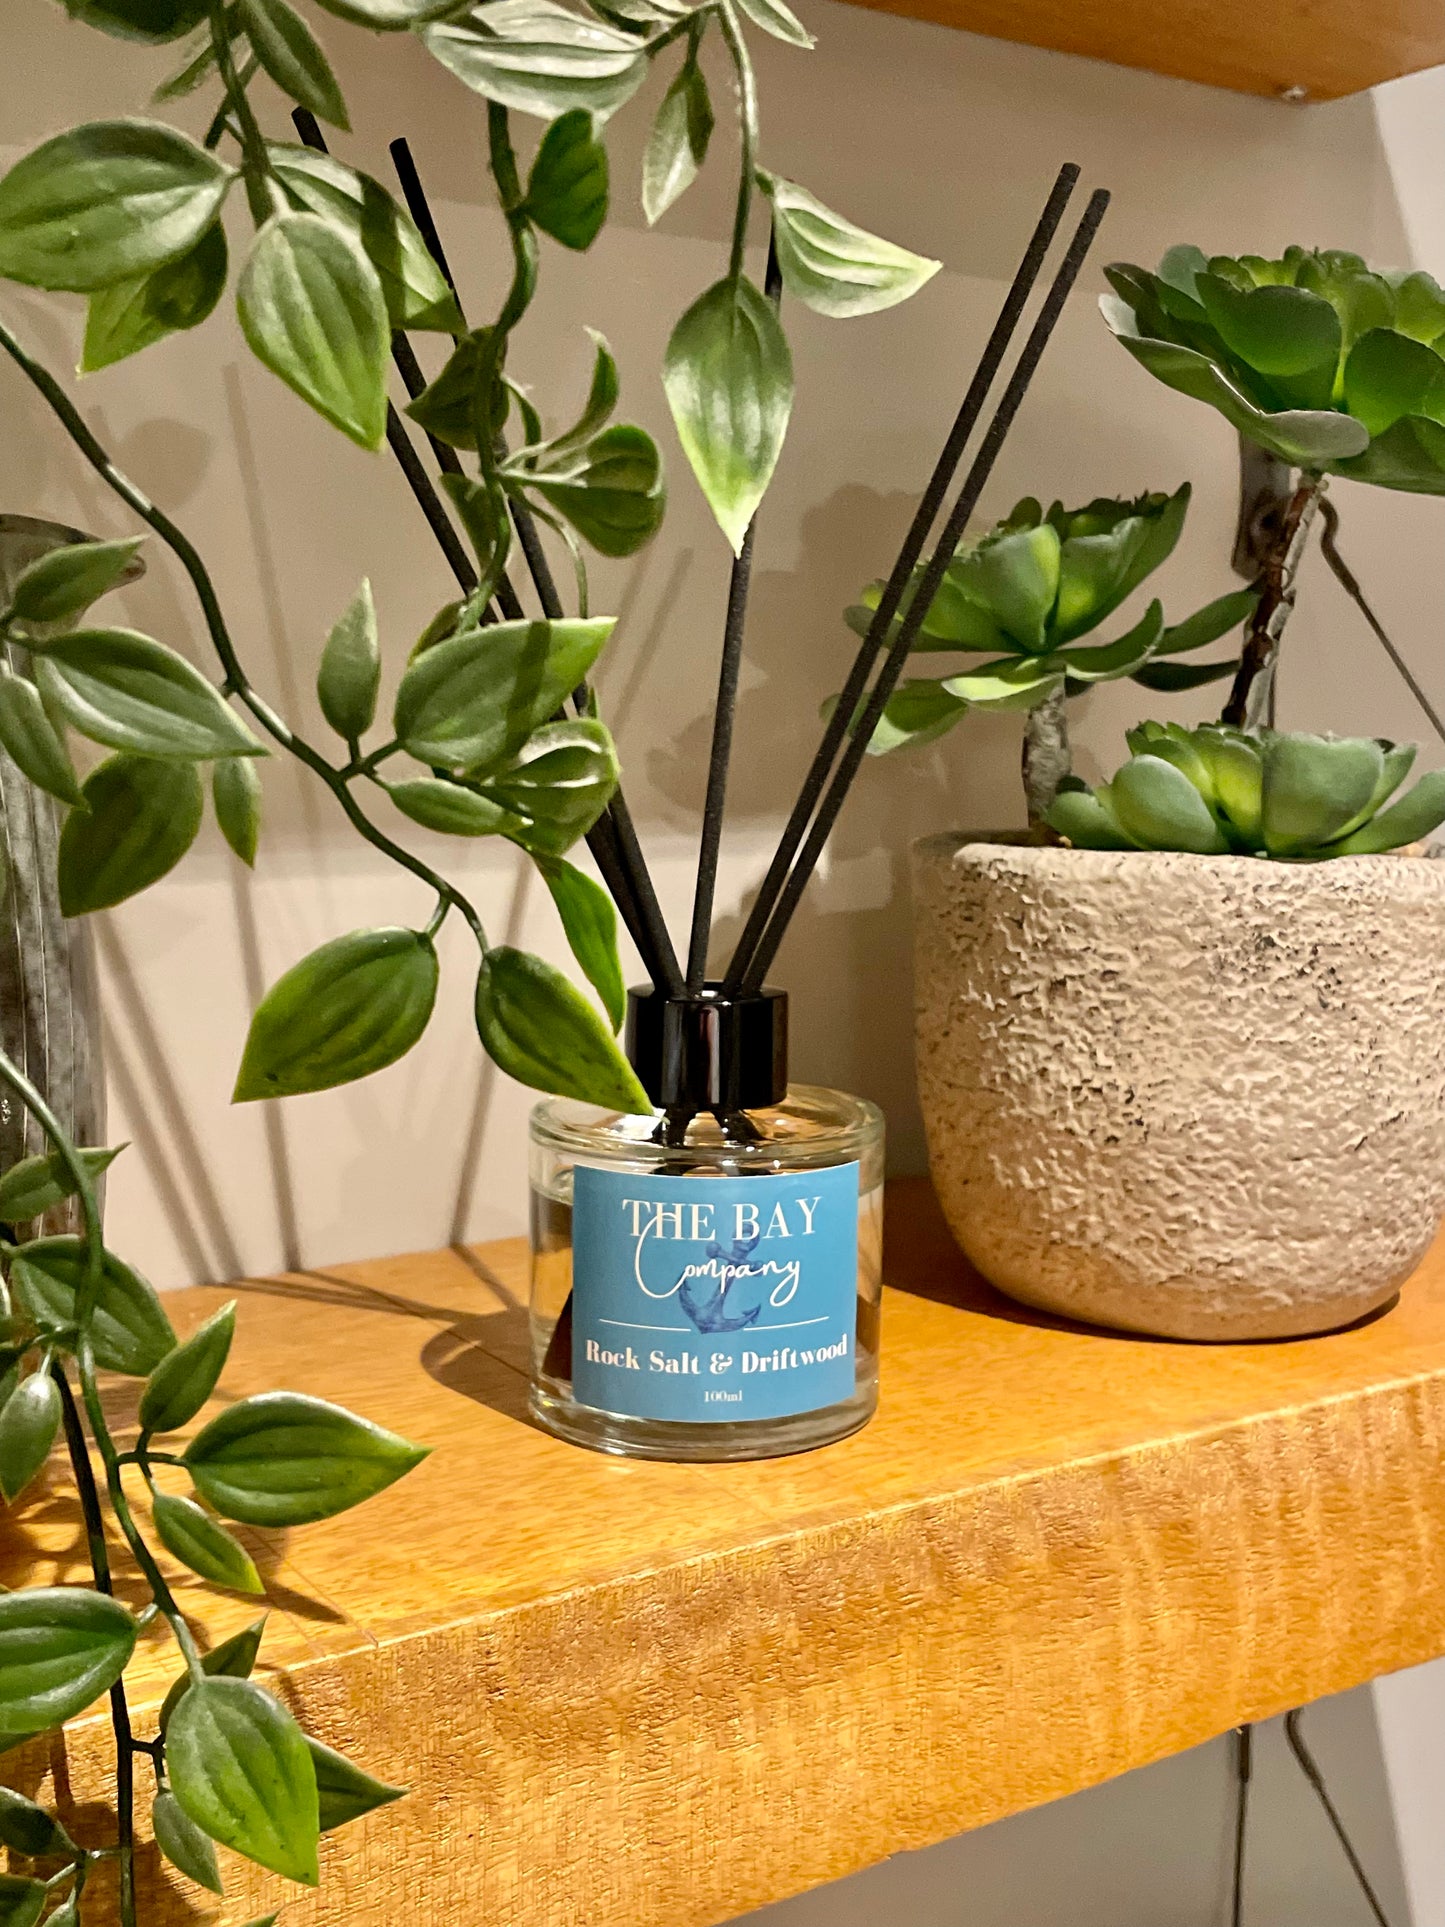 The Bay Company reed diffuser with a salty seaside scent. Rock salt and driftwood. 